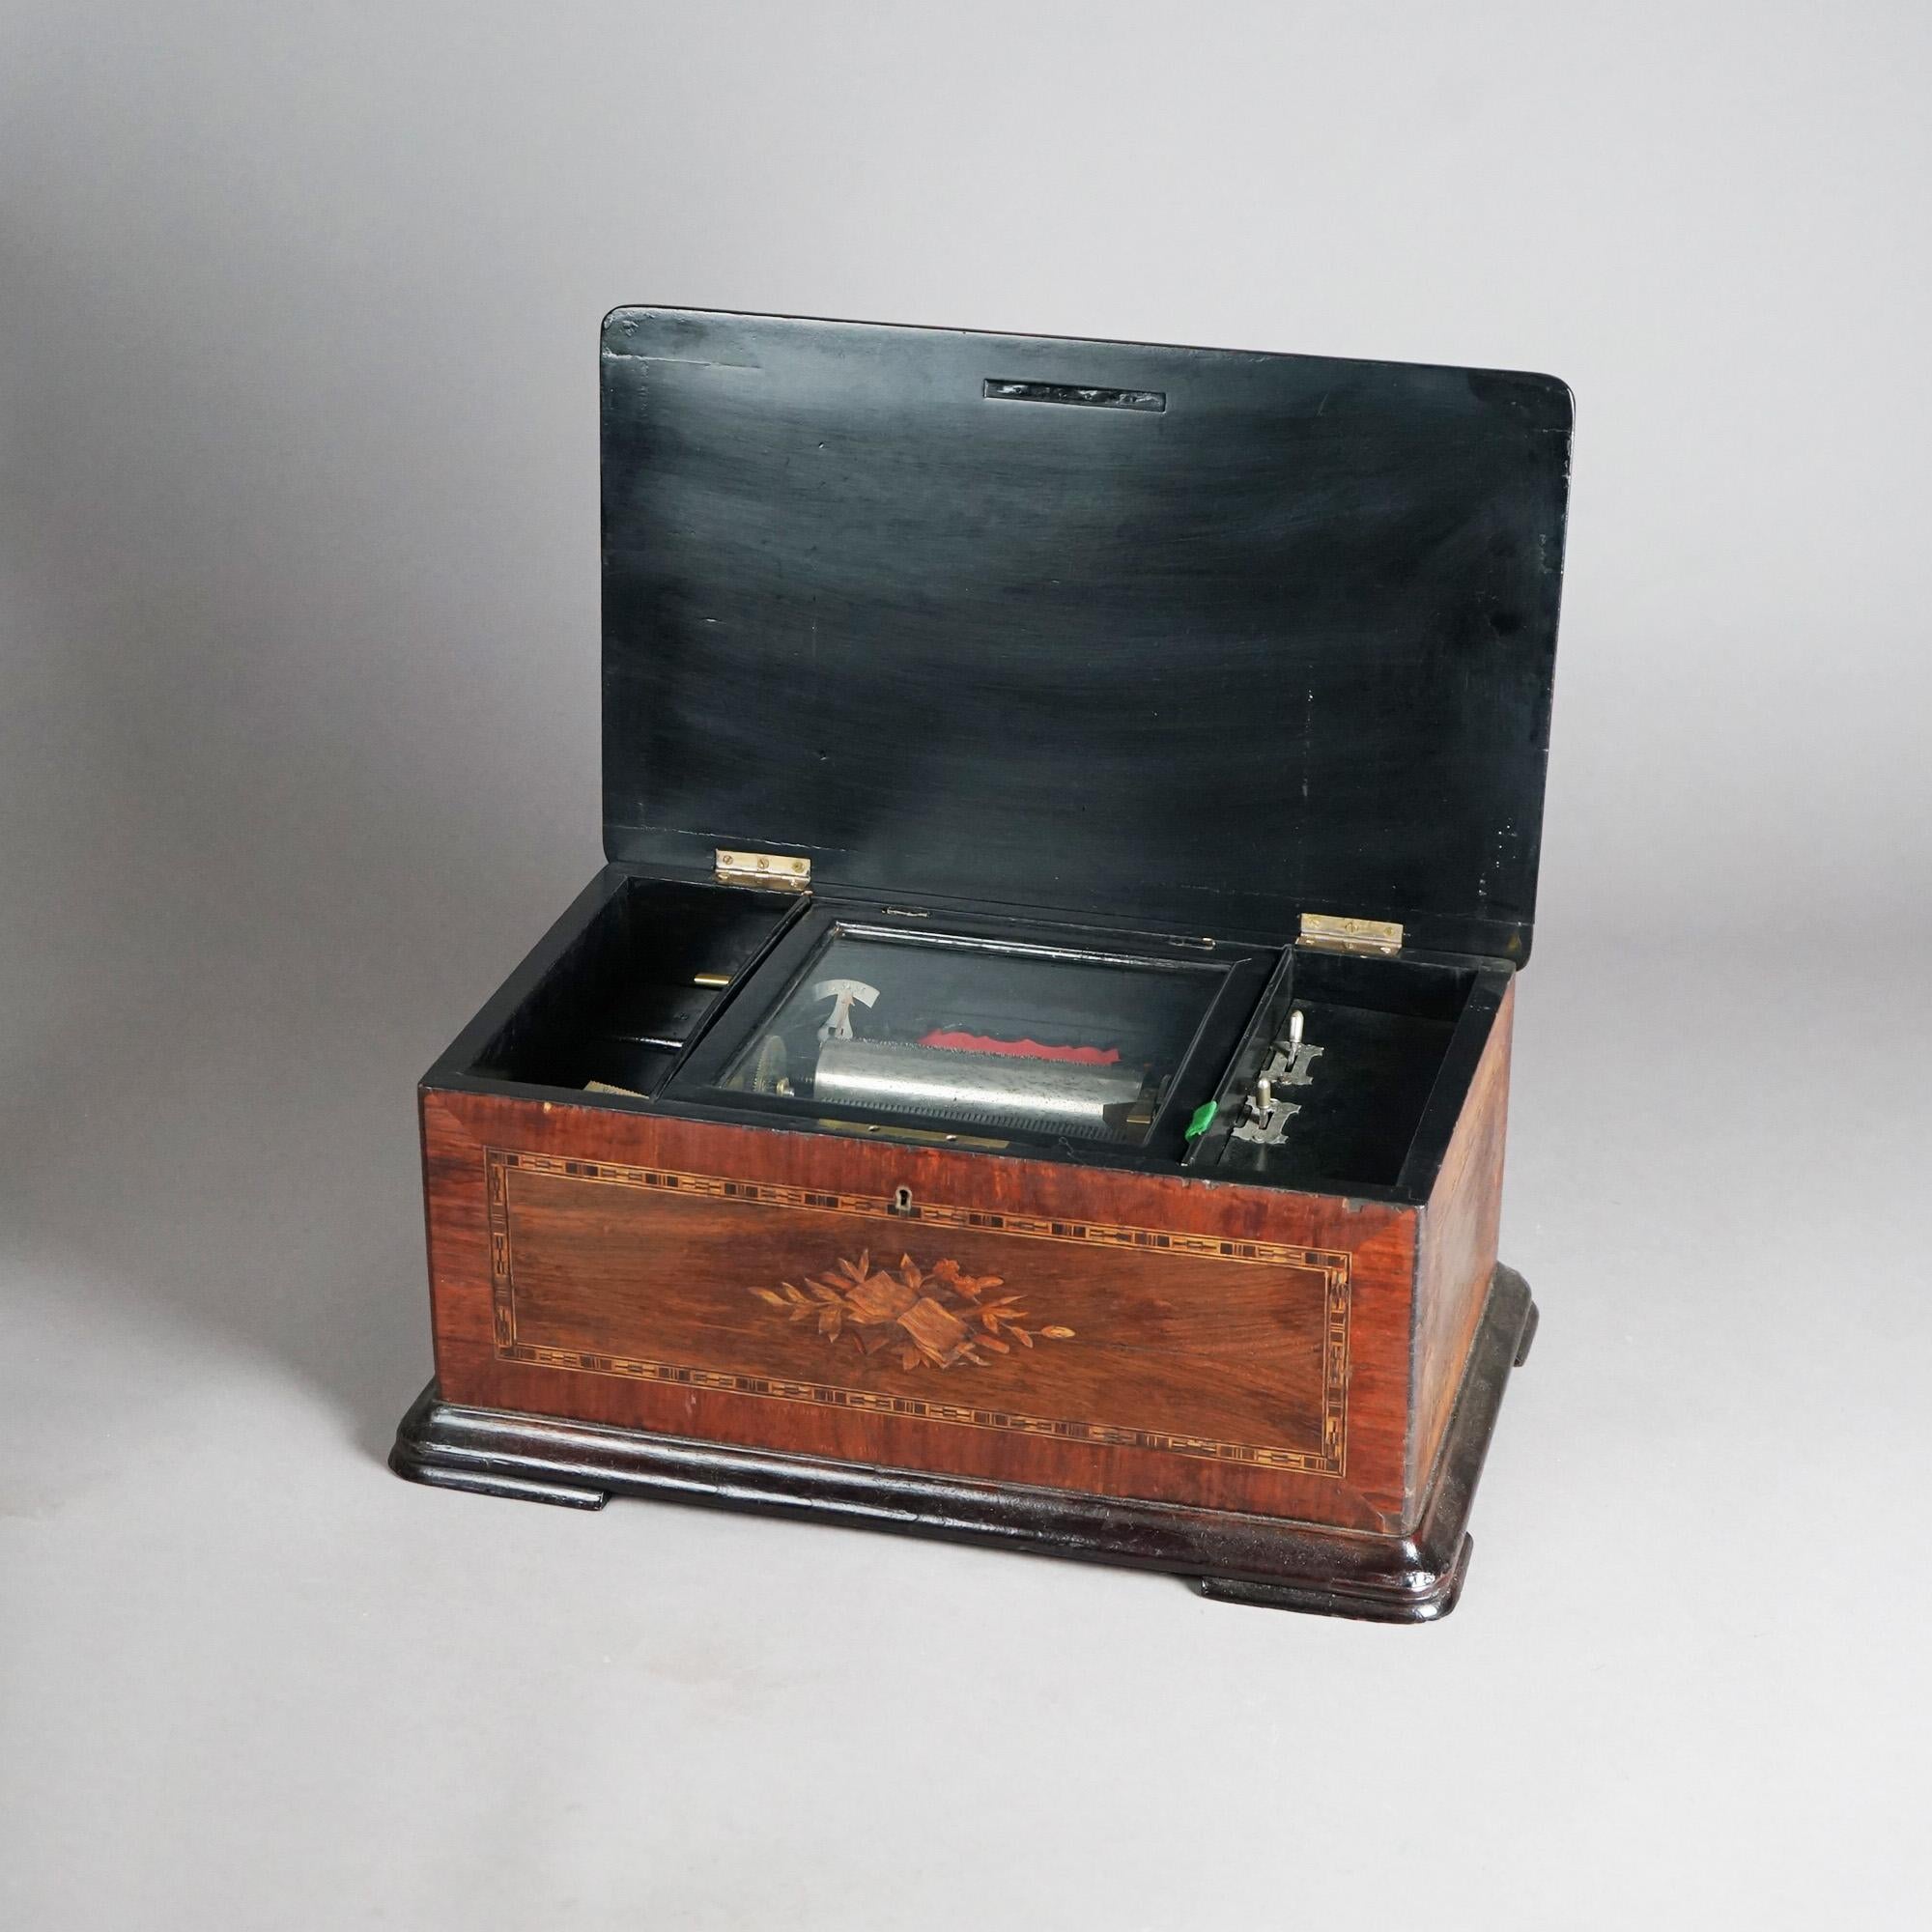 An antique six-tune Swiss music box offers rosewood construction with crossbanded top having floral marquetry decoration and opening to ebonized interior, 19th century

Measures- 8.5''H x 19.5''W x 11.75''D